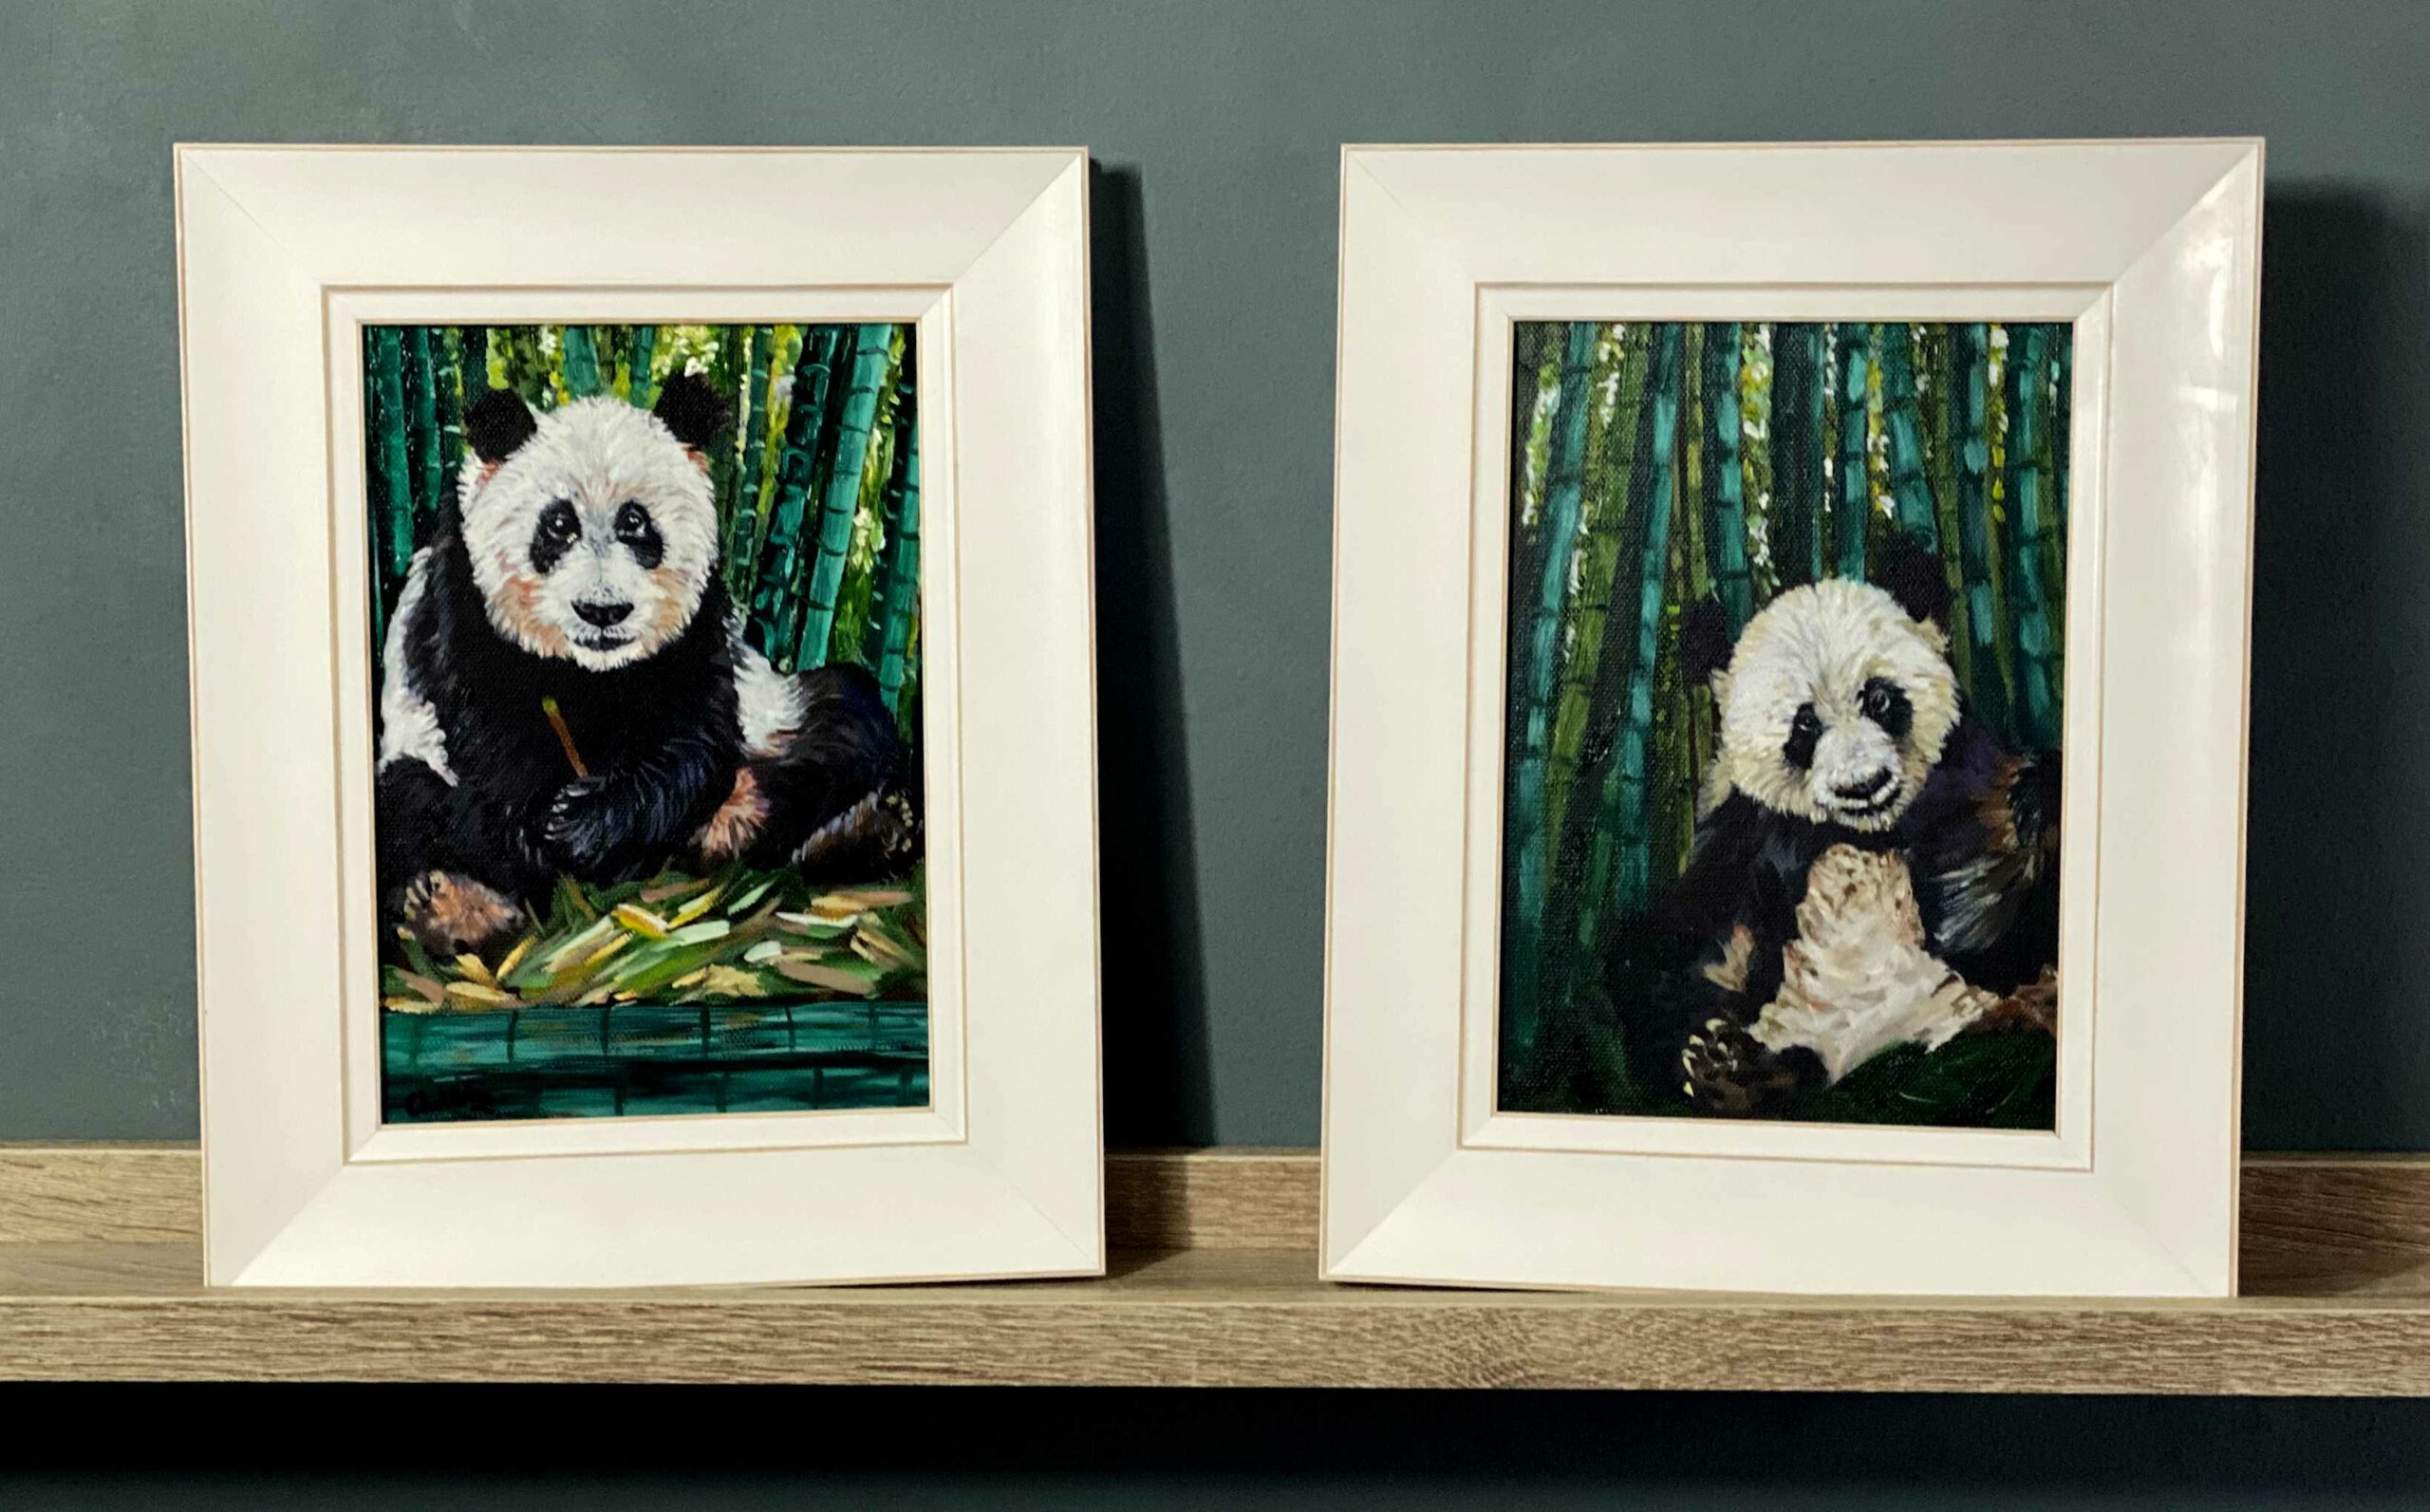 Two pieces of artwork with Giant Pandas Pumpkin and Squash in the green bamboos